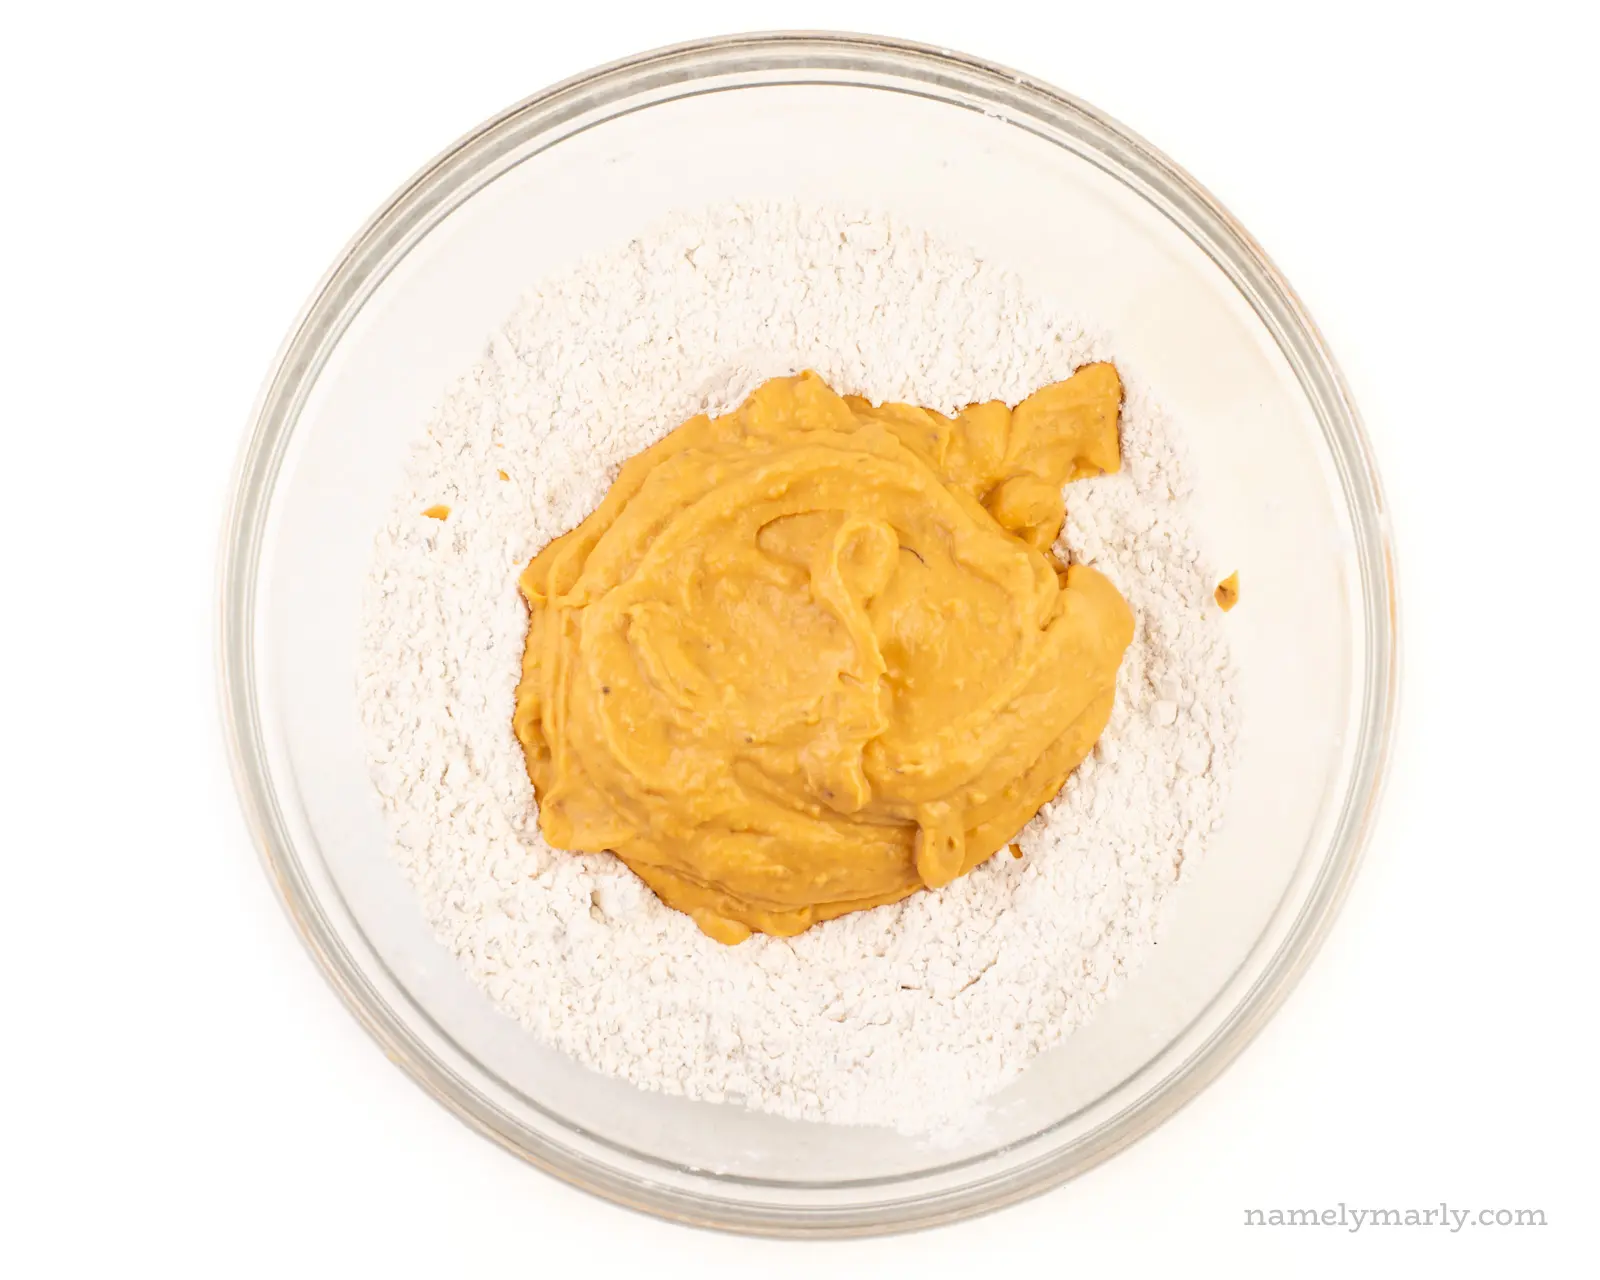 The sweet potato mash has been added to the flour mixture in a large, glass bowl.